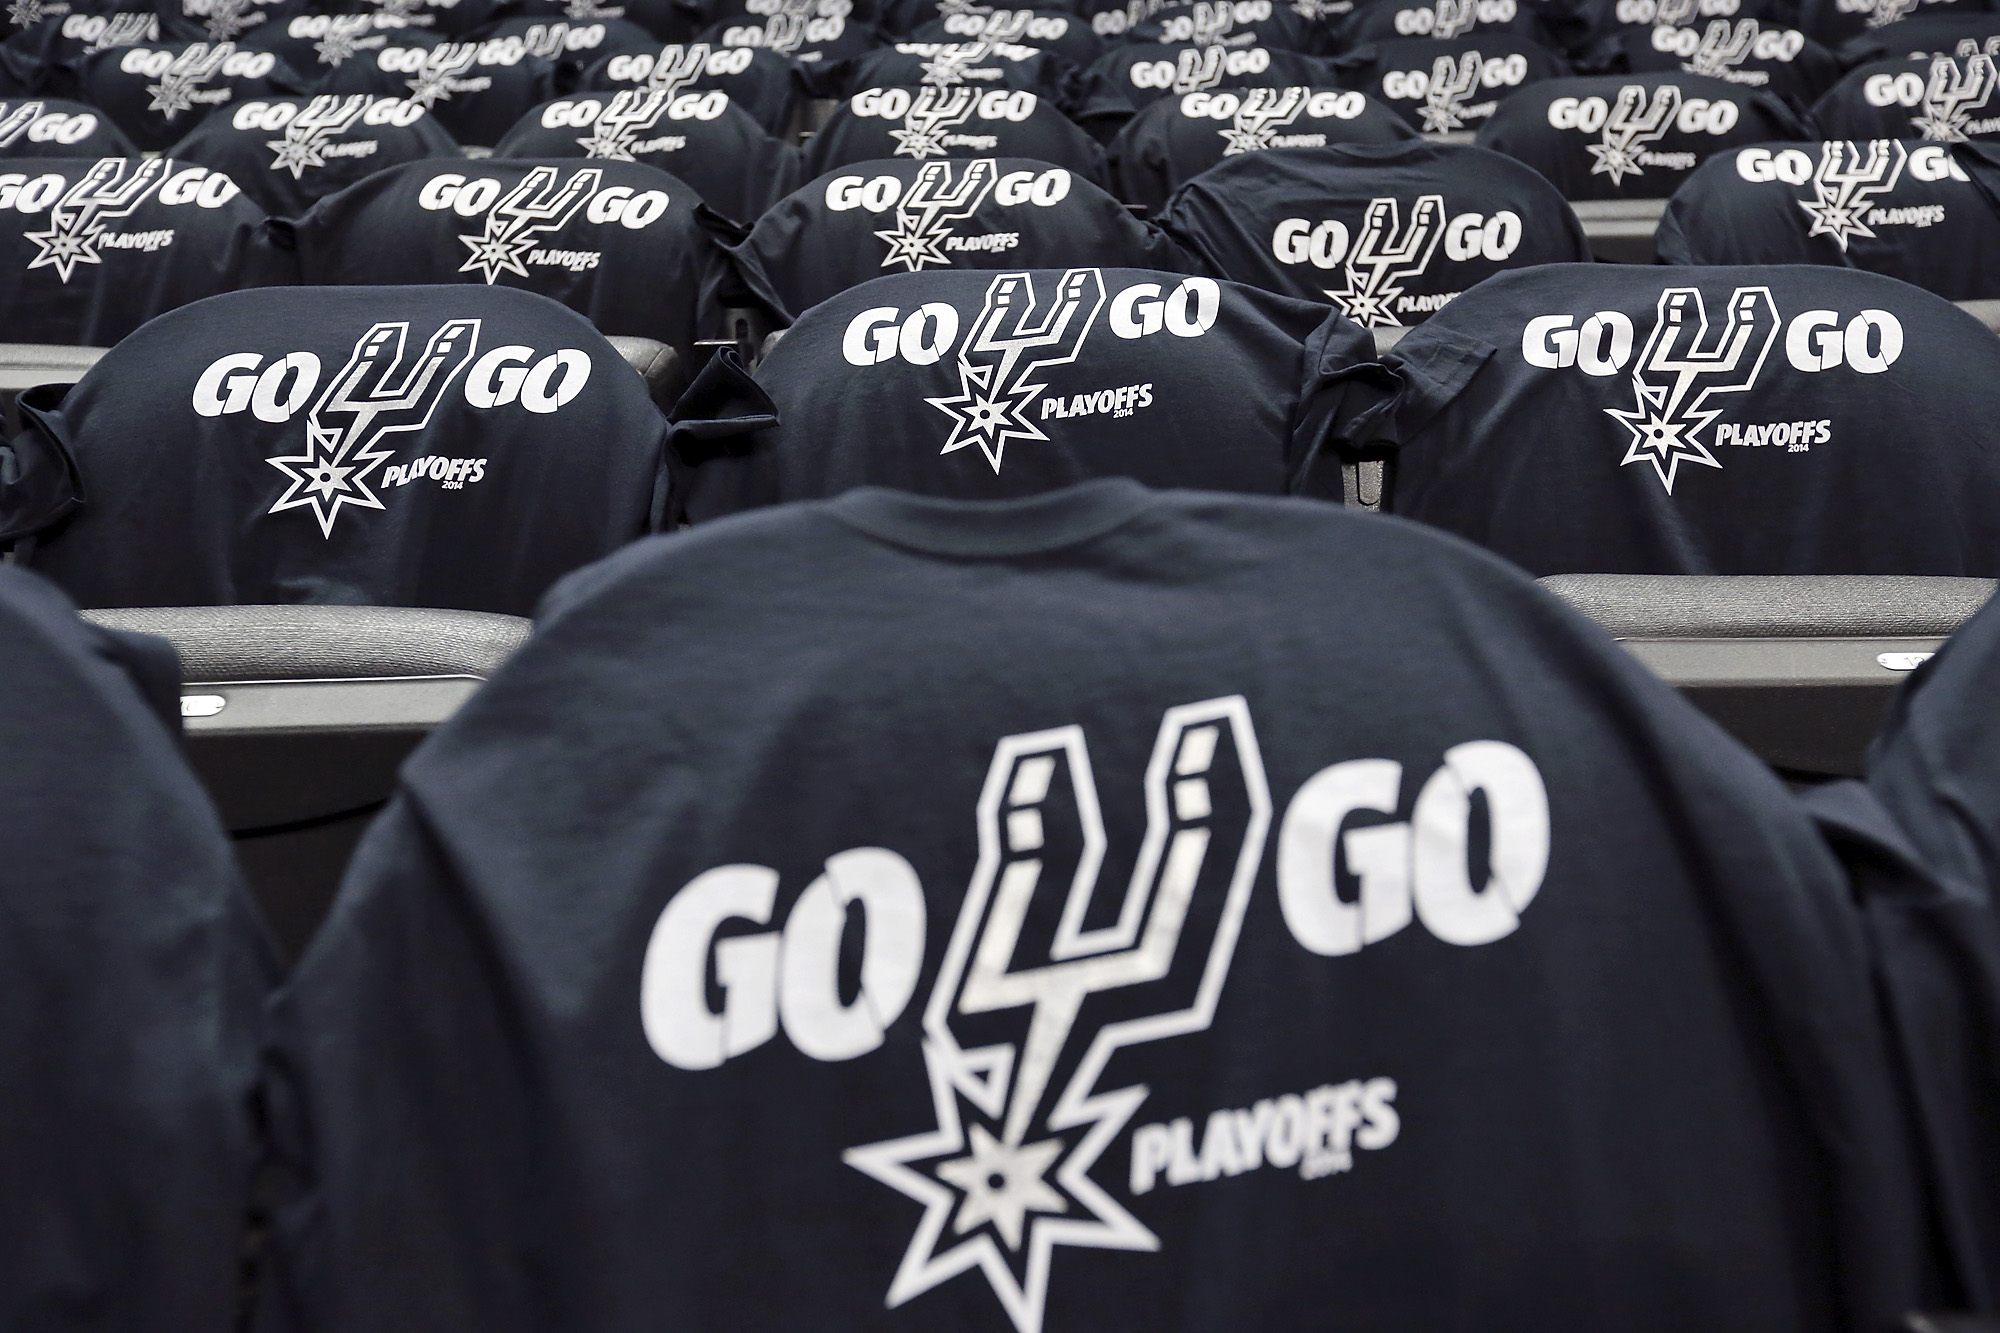 The Business of Free NBA Playoff Shirts